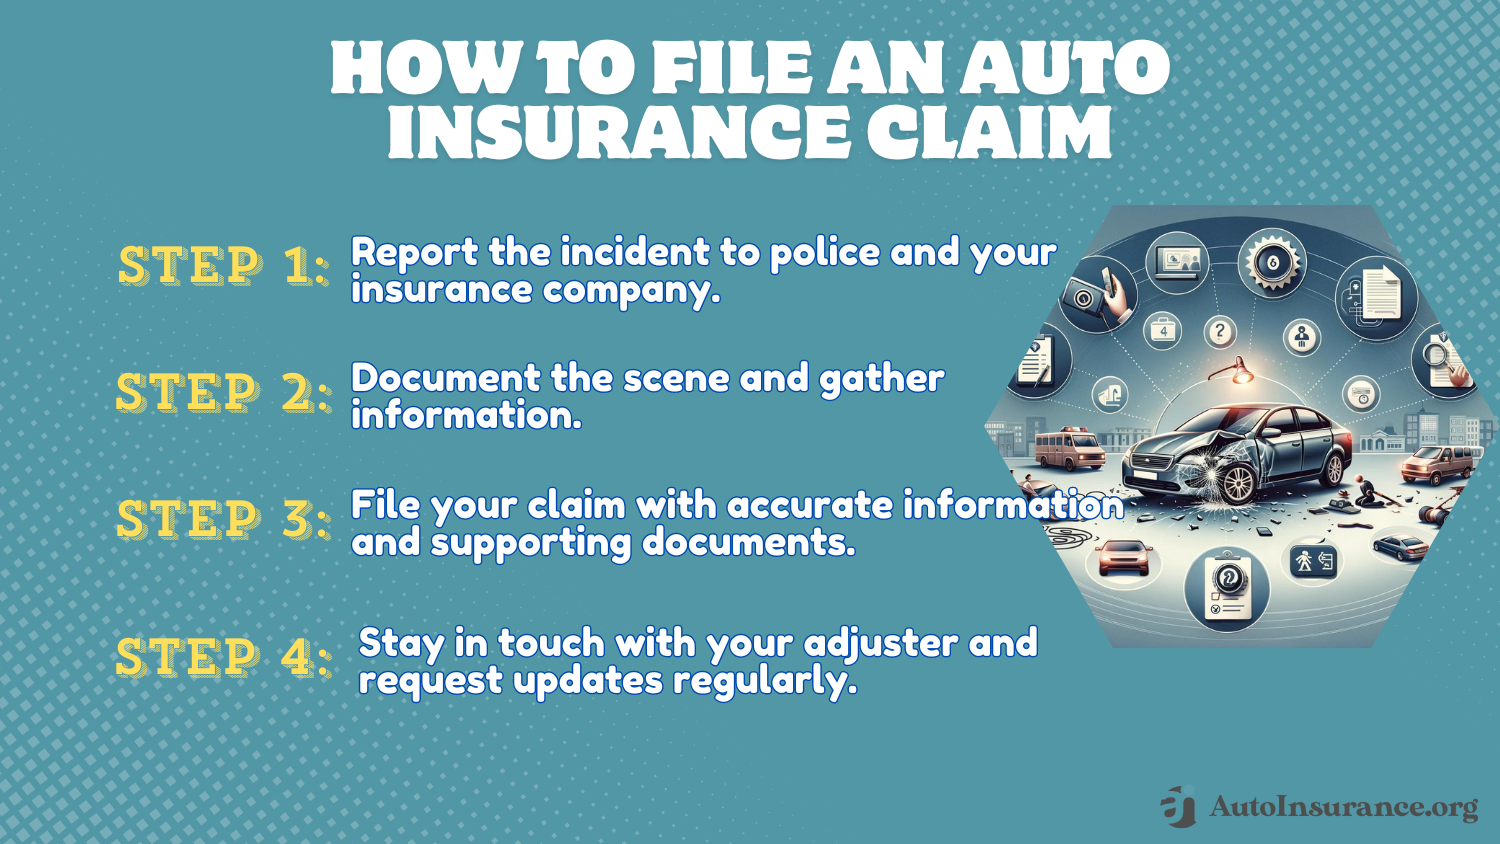 CURE Auto Insurance Review: How to File an Auto Insurance Claim Infographic